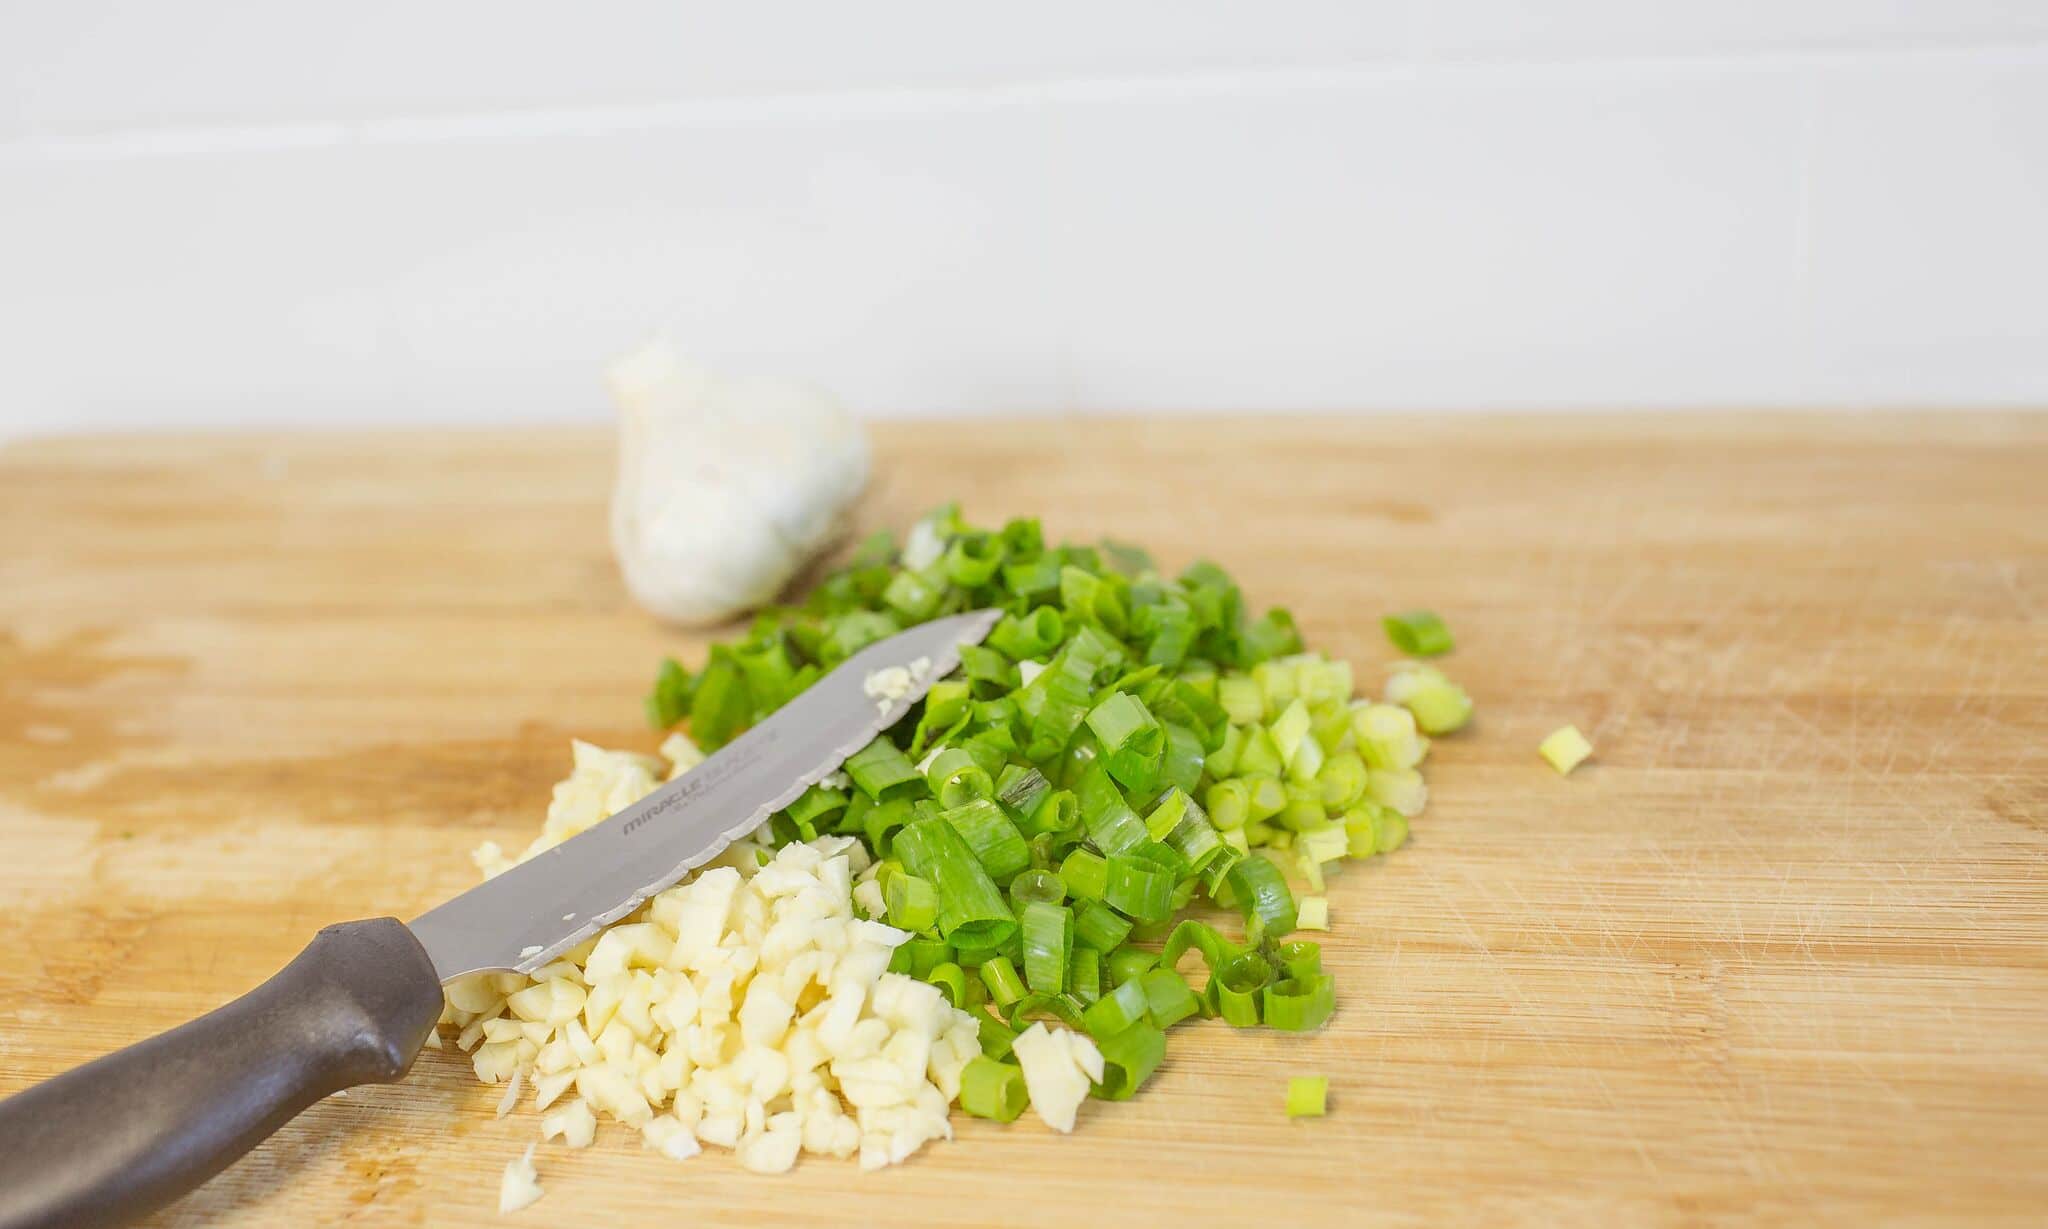 Chop green onions and garlic then set aside.